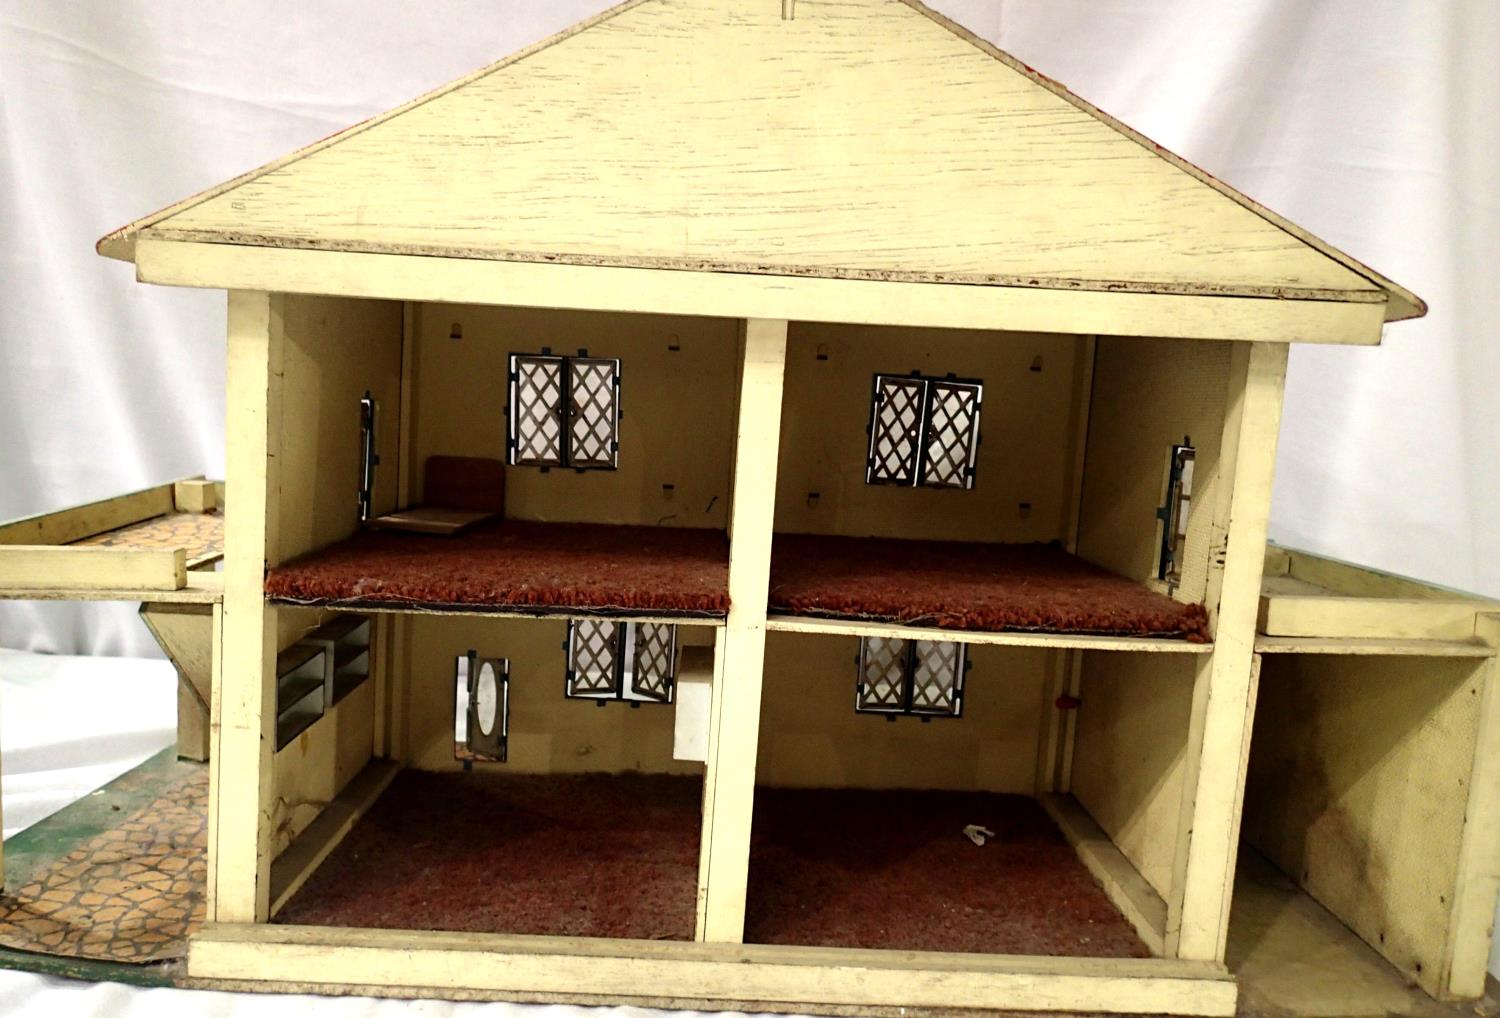 Gee Bee Toys, Hull, dolls house circa 1960s, wood with tinplate opening windows/doors, in good - Image 6 of 8